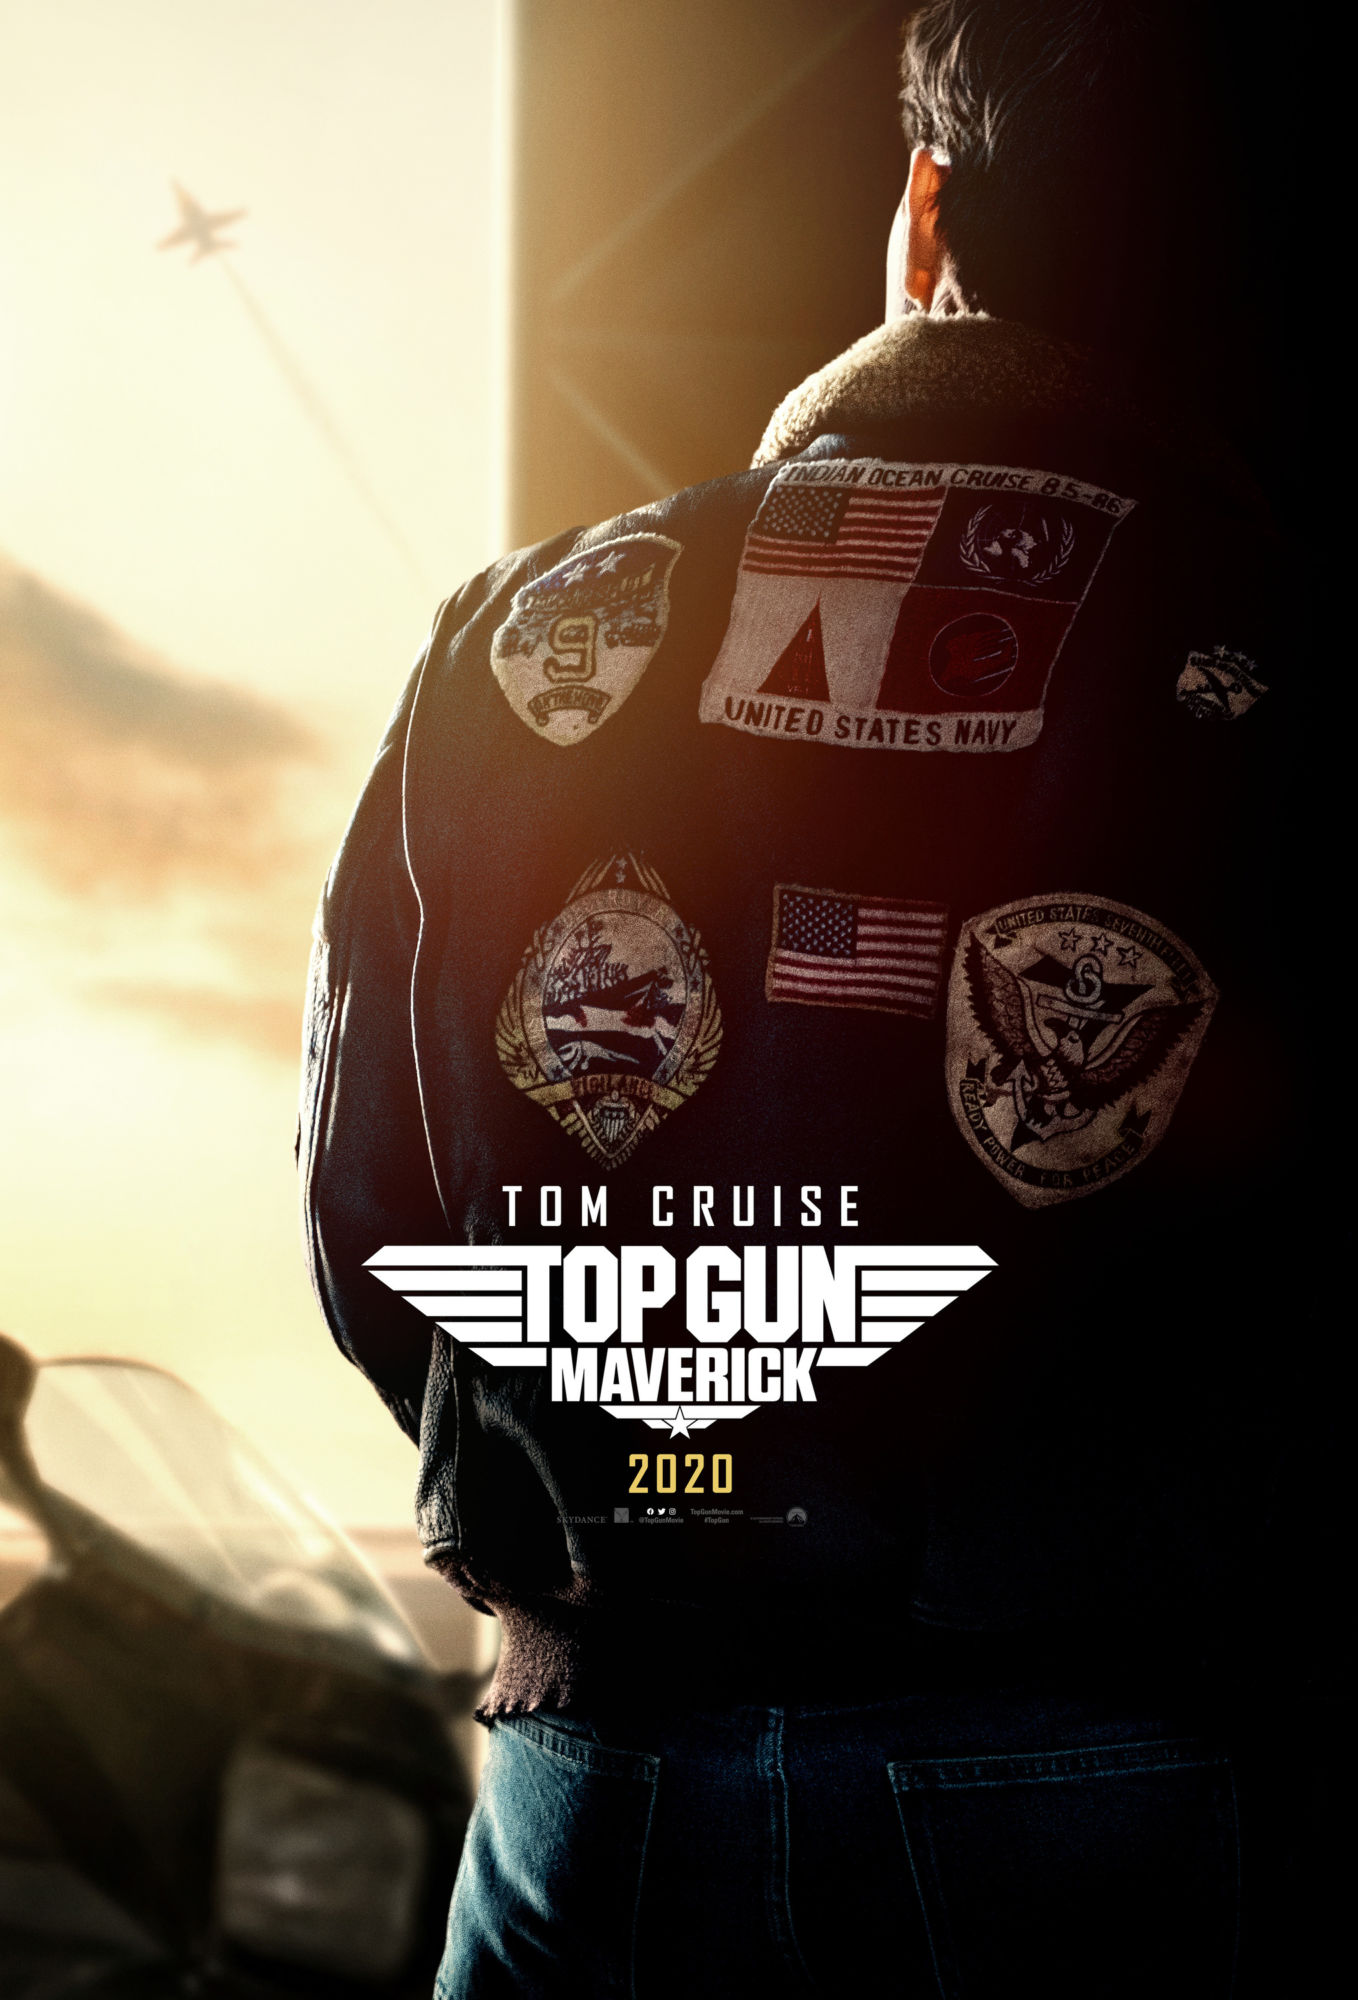 Top Gun' sequel 'Maverick' delayed one year, now due out June 2020